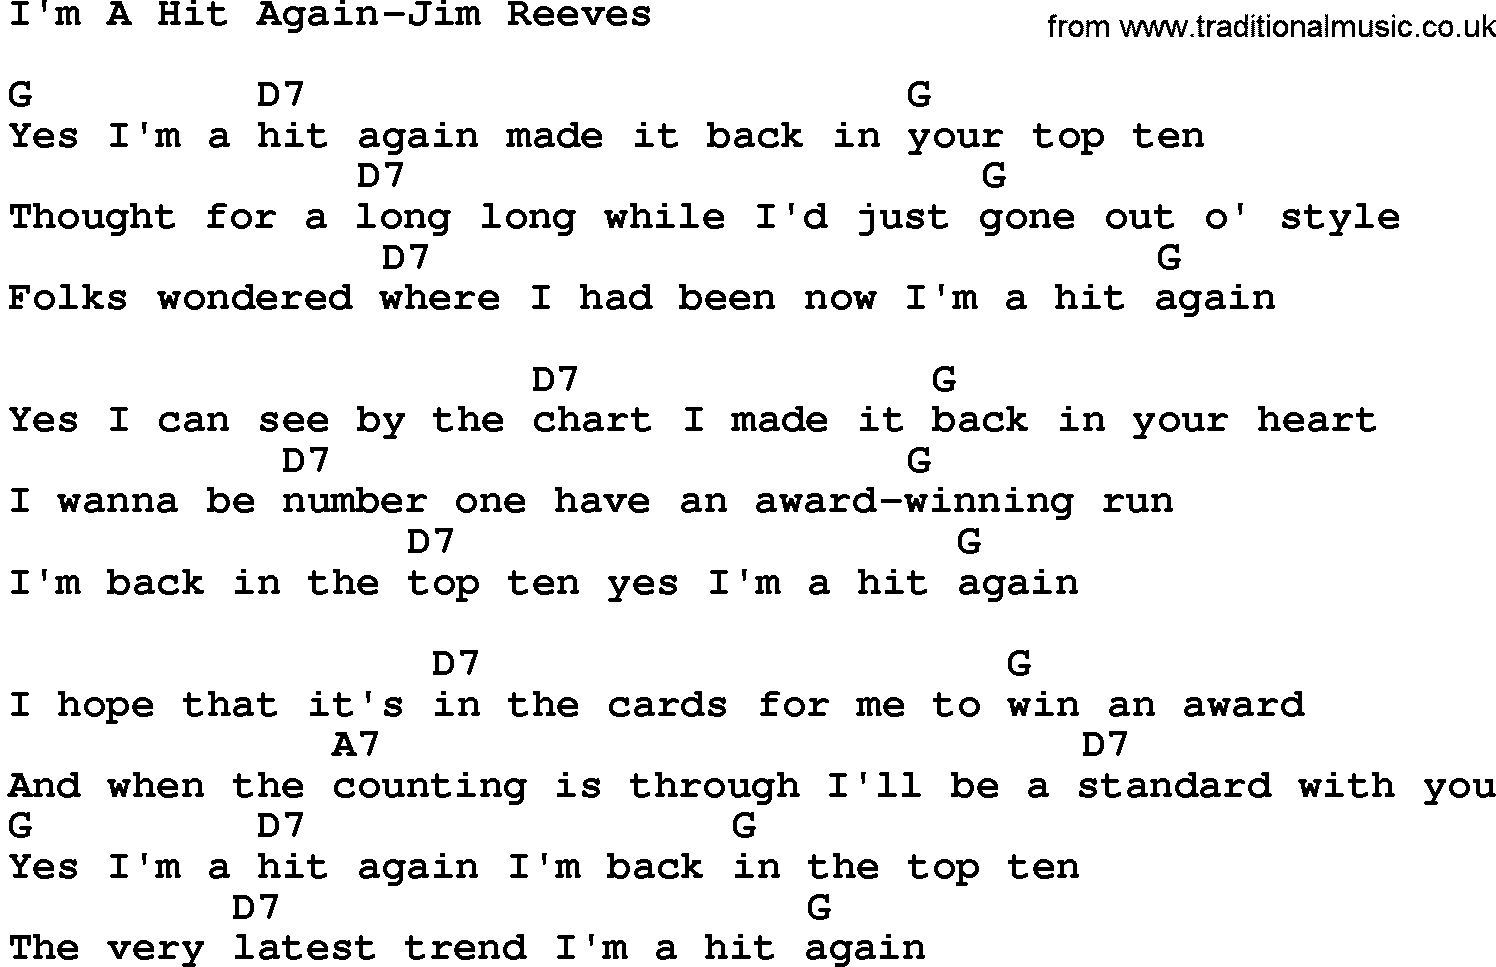 Country music song: I'm A Hit Again-Jim Reeves lyrics and chords